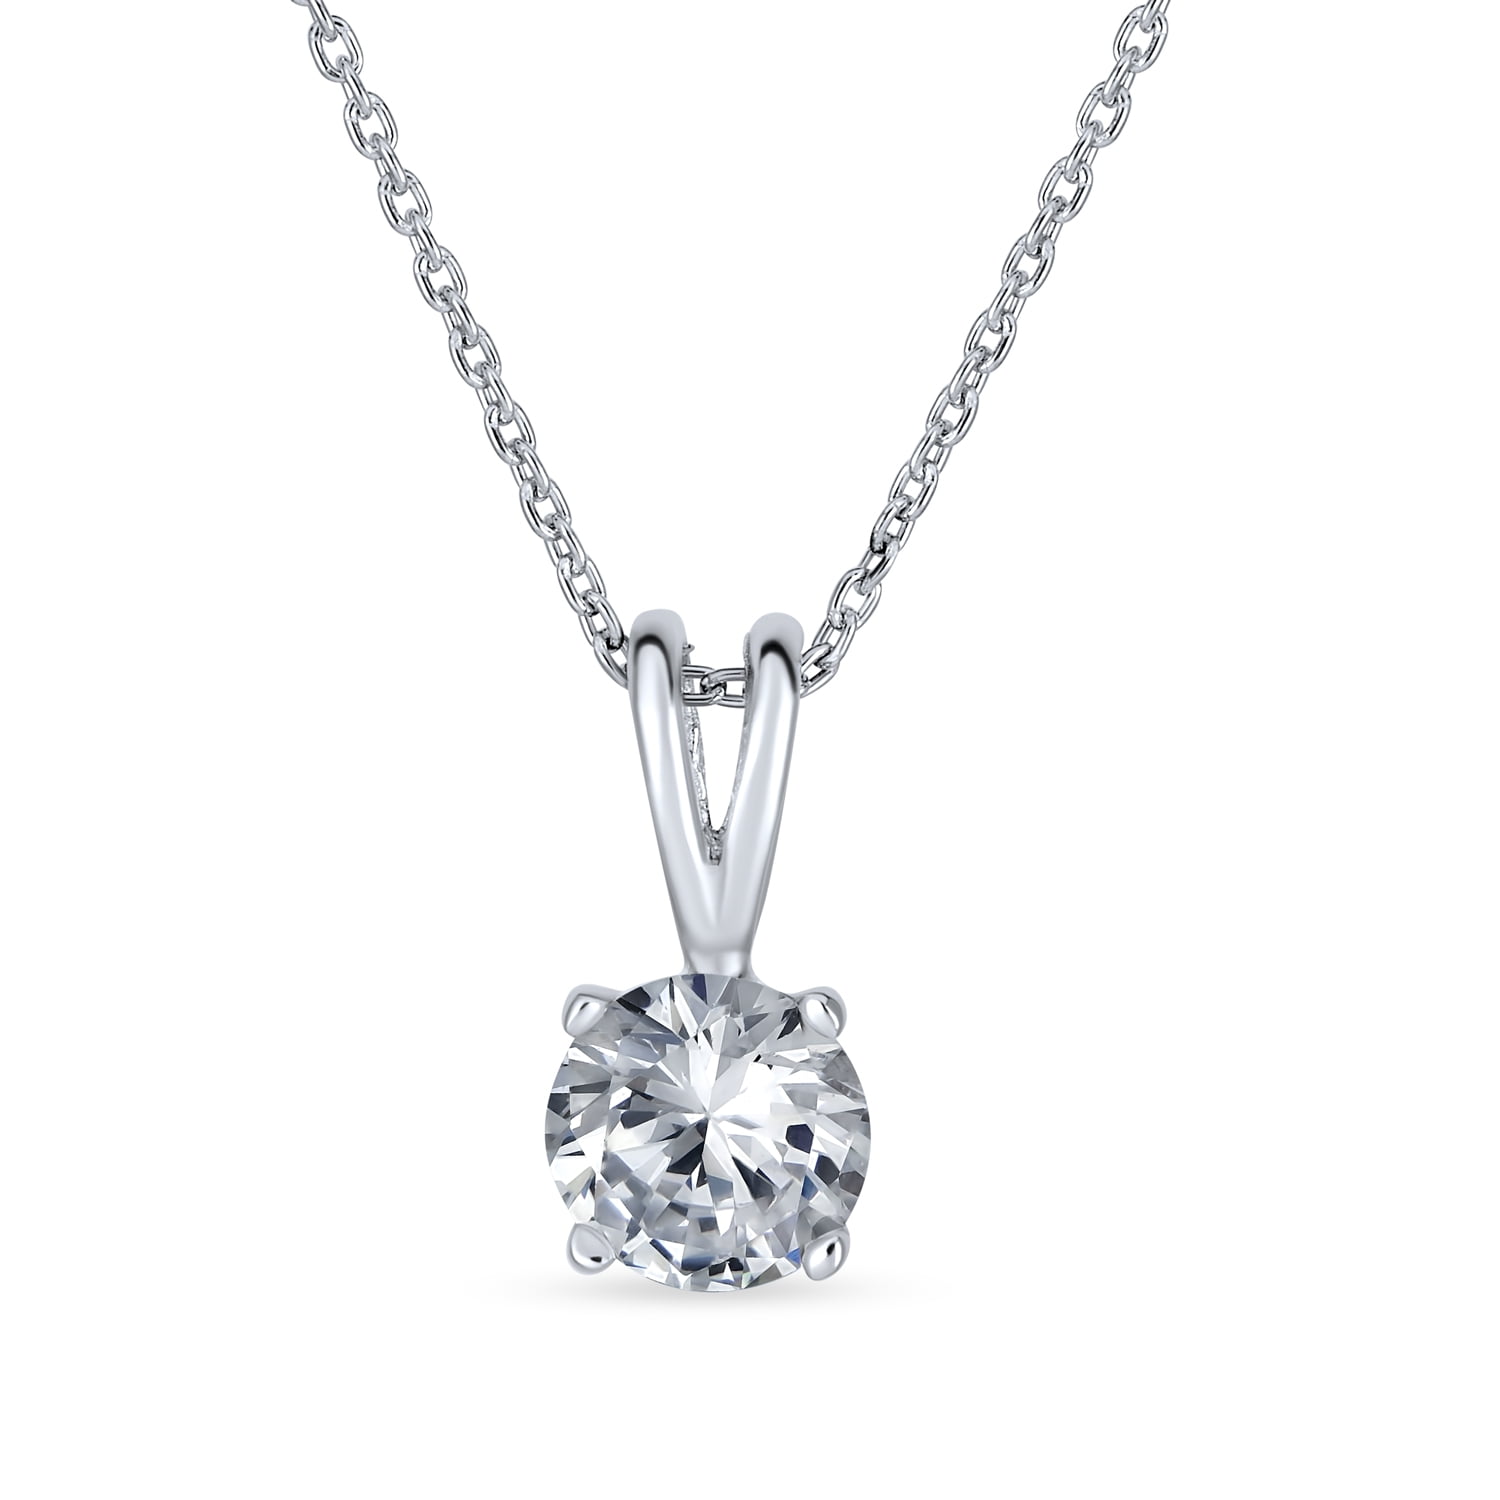 Sterling Silver Cubic Zirconia Pendant and Chain FREE POSTAGE